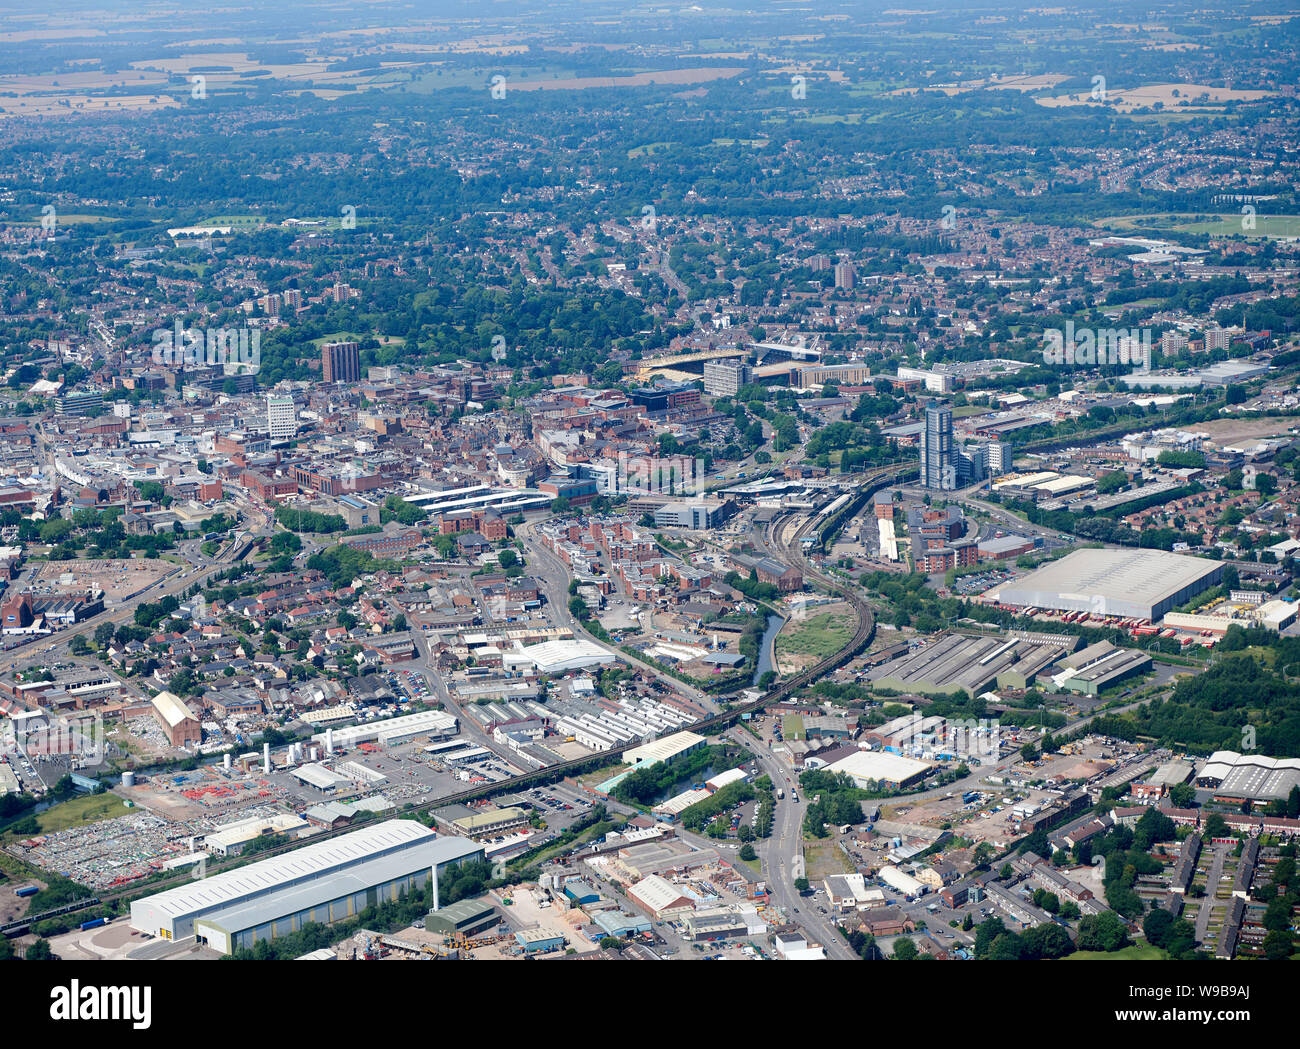 An Aerial View Of Wolverhampton City Centre West Midlands England Uk Stock Photo Alamy